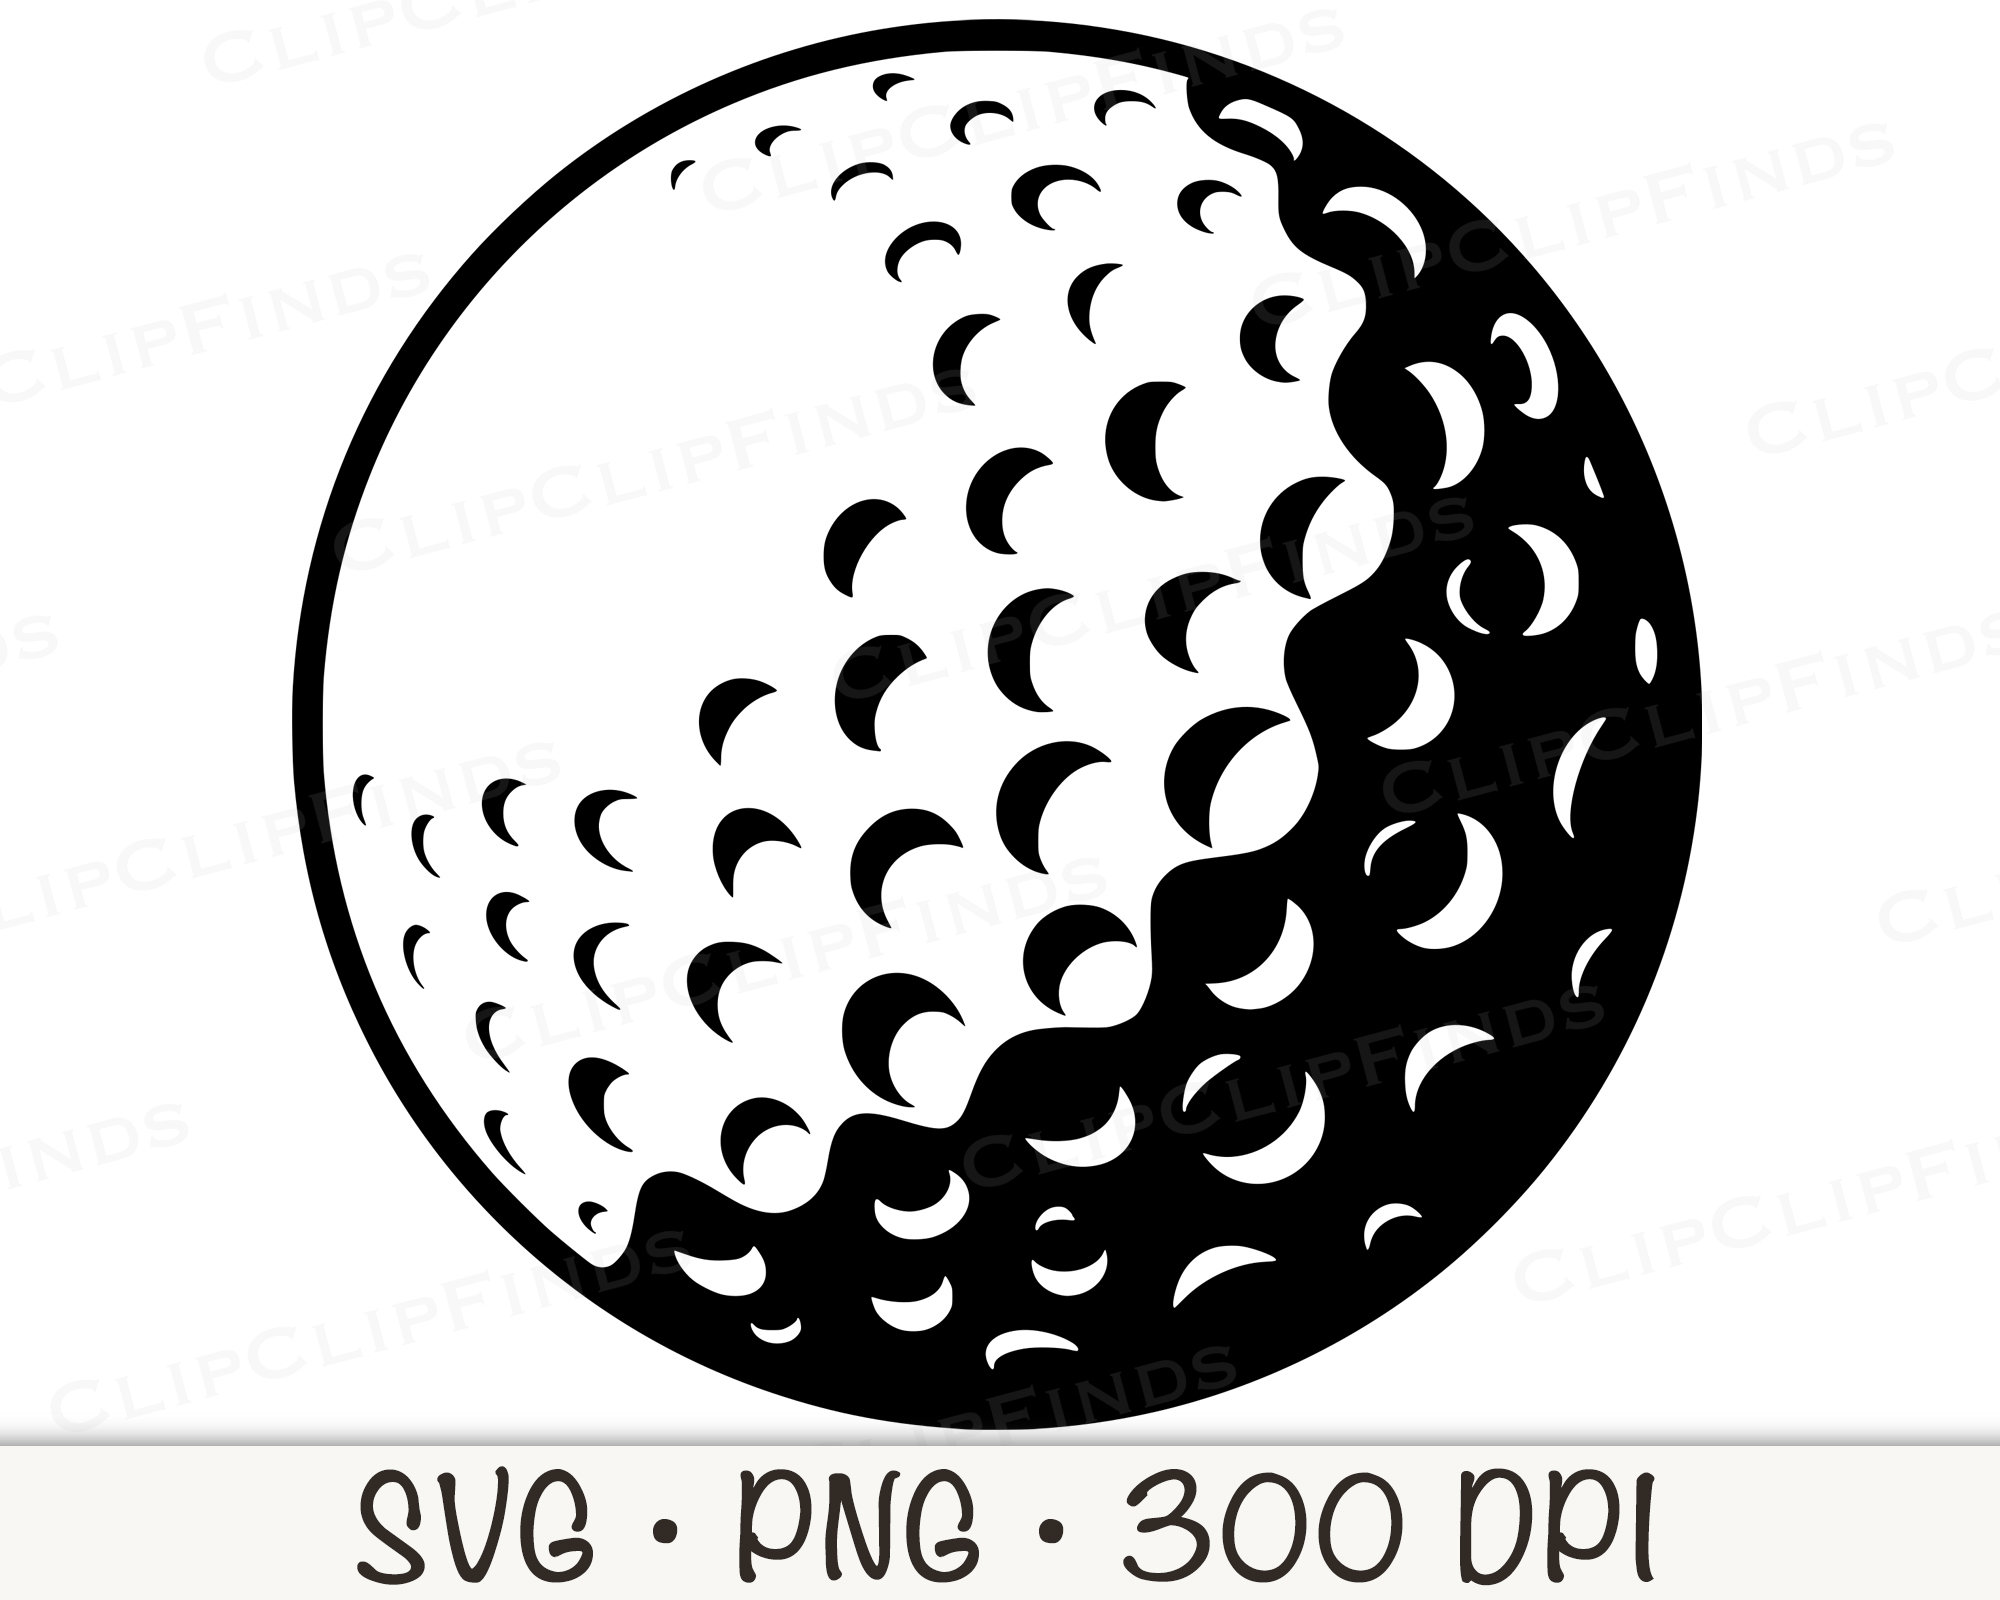 Five Star Circle Stamp Vector Images (over 110)